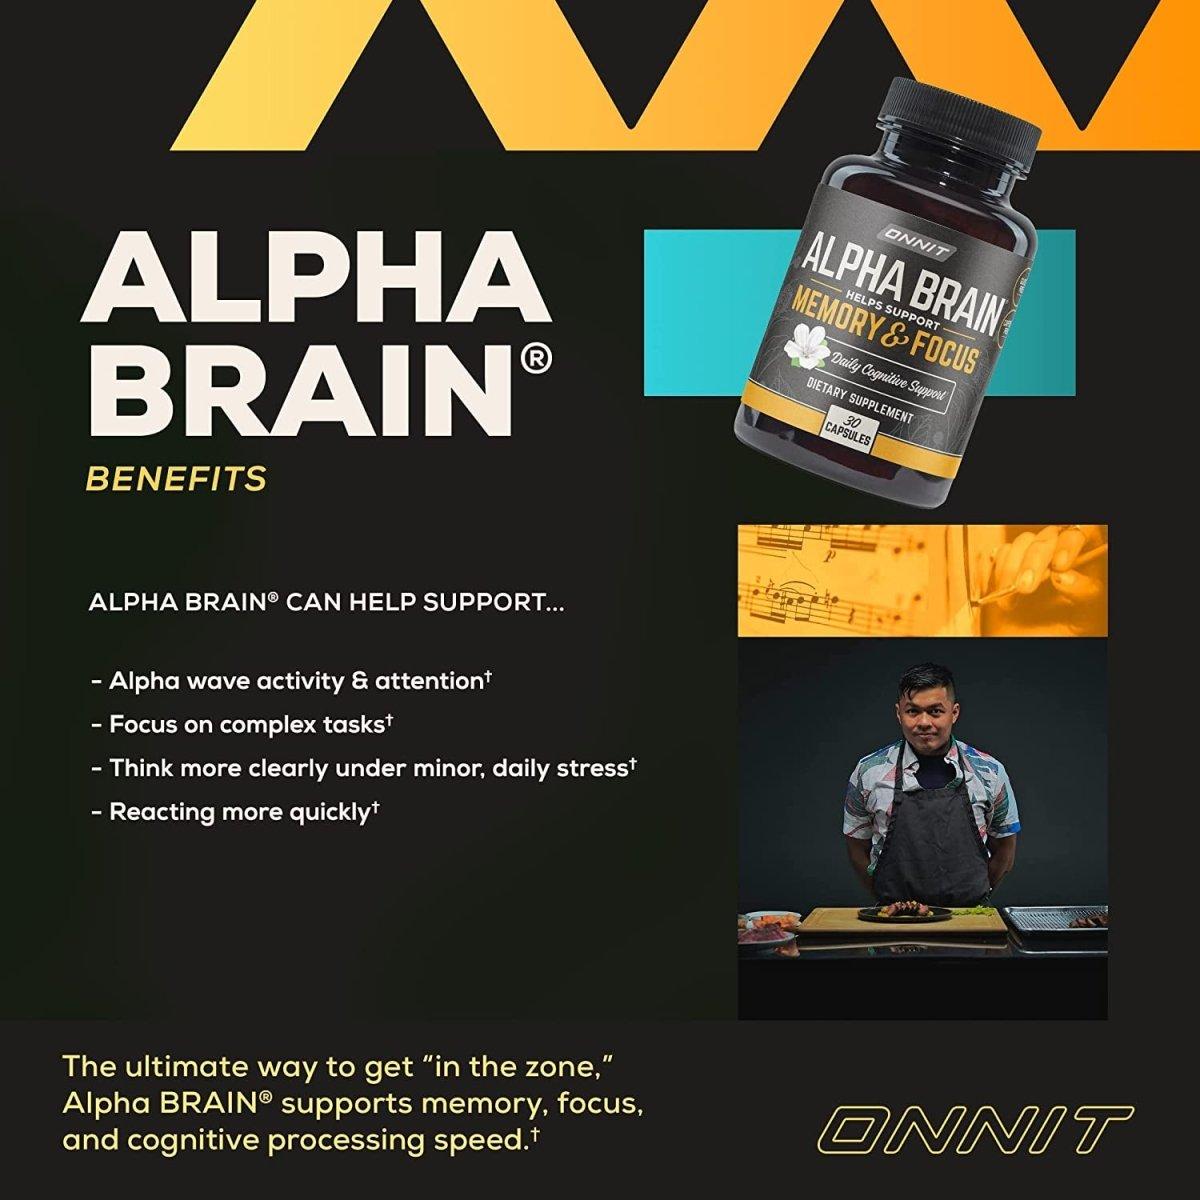 Onnit Alpha Brain Premium Nootropic Brain Supplement, 30 Count, for Men & Women - Caffeine-Free Focus Capsules for Concentration, Brain Booster& Memory Support - Cat'S Claw, Bacopa, Oat Straw - Glam Global UK